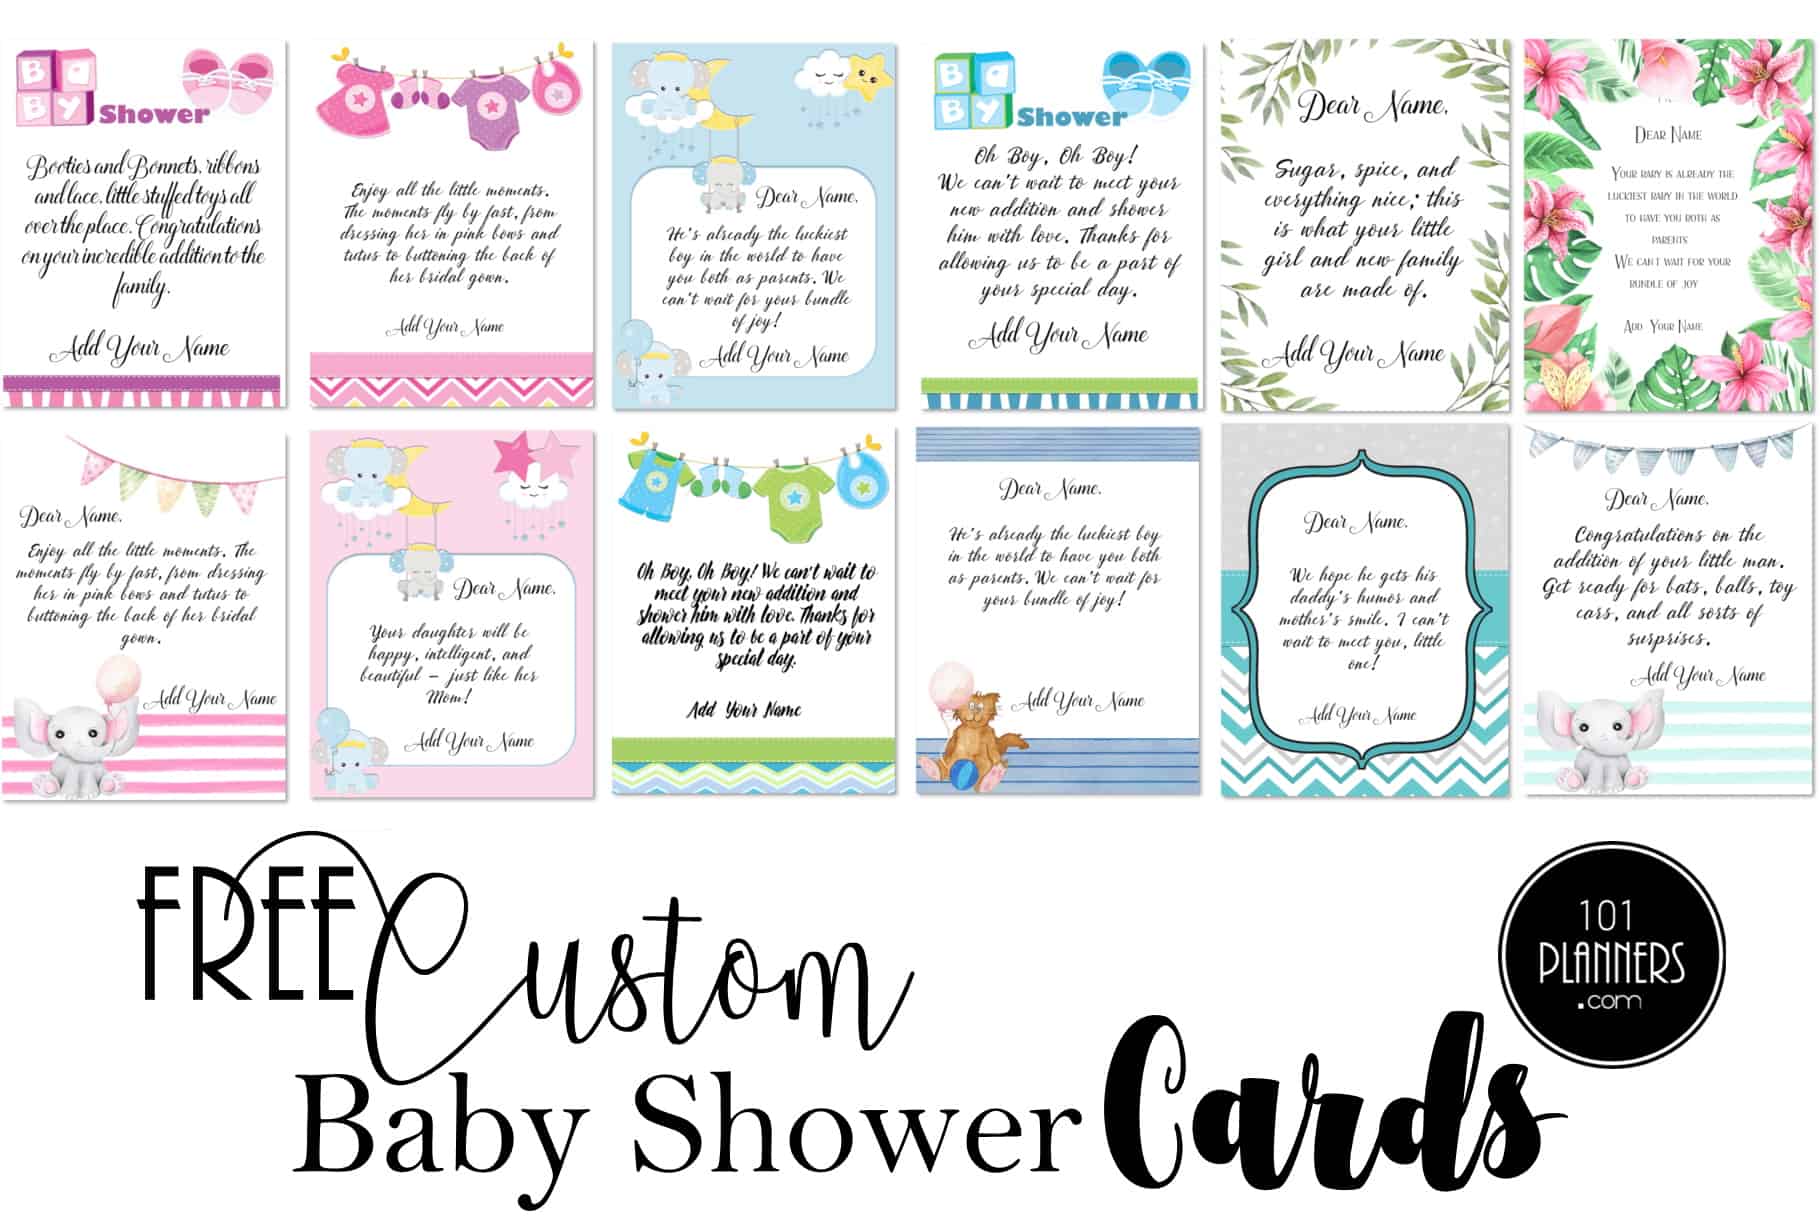 Baby Shower Greeting Card Stock Illustration - Download Image Now